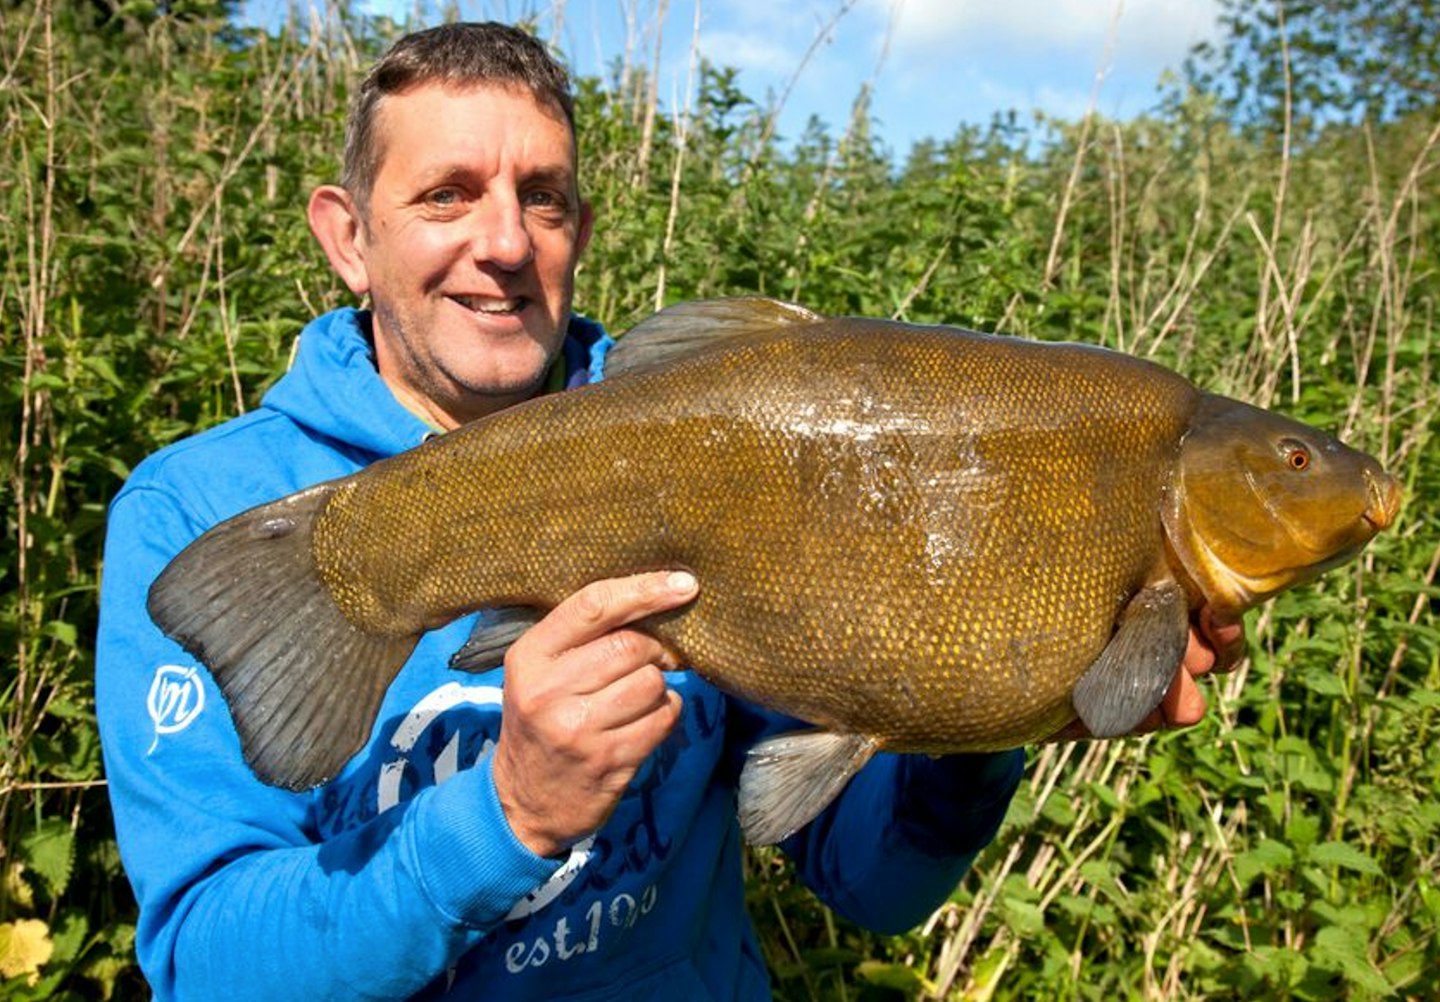 The winner was the tench